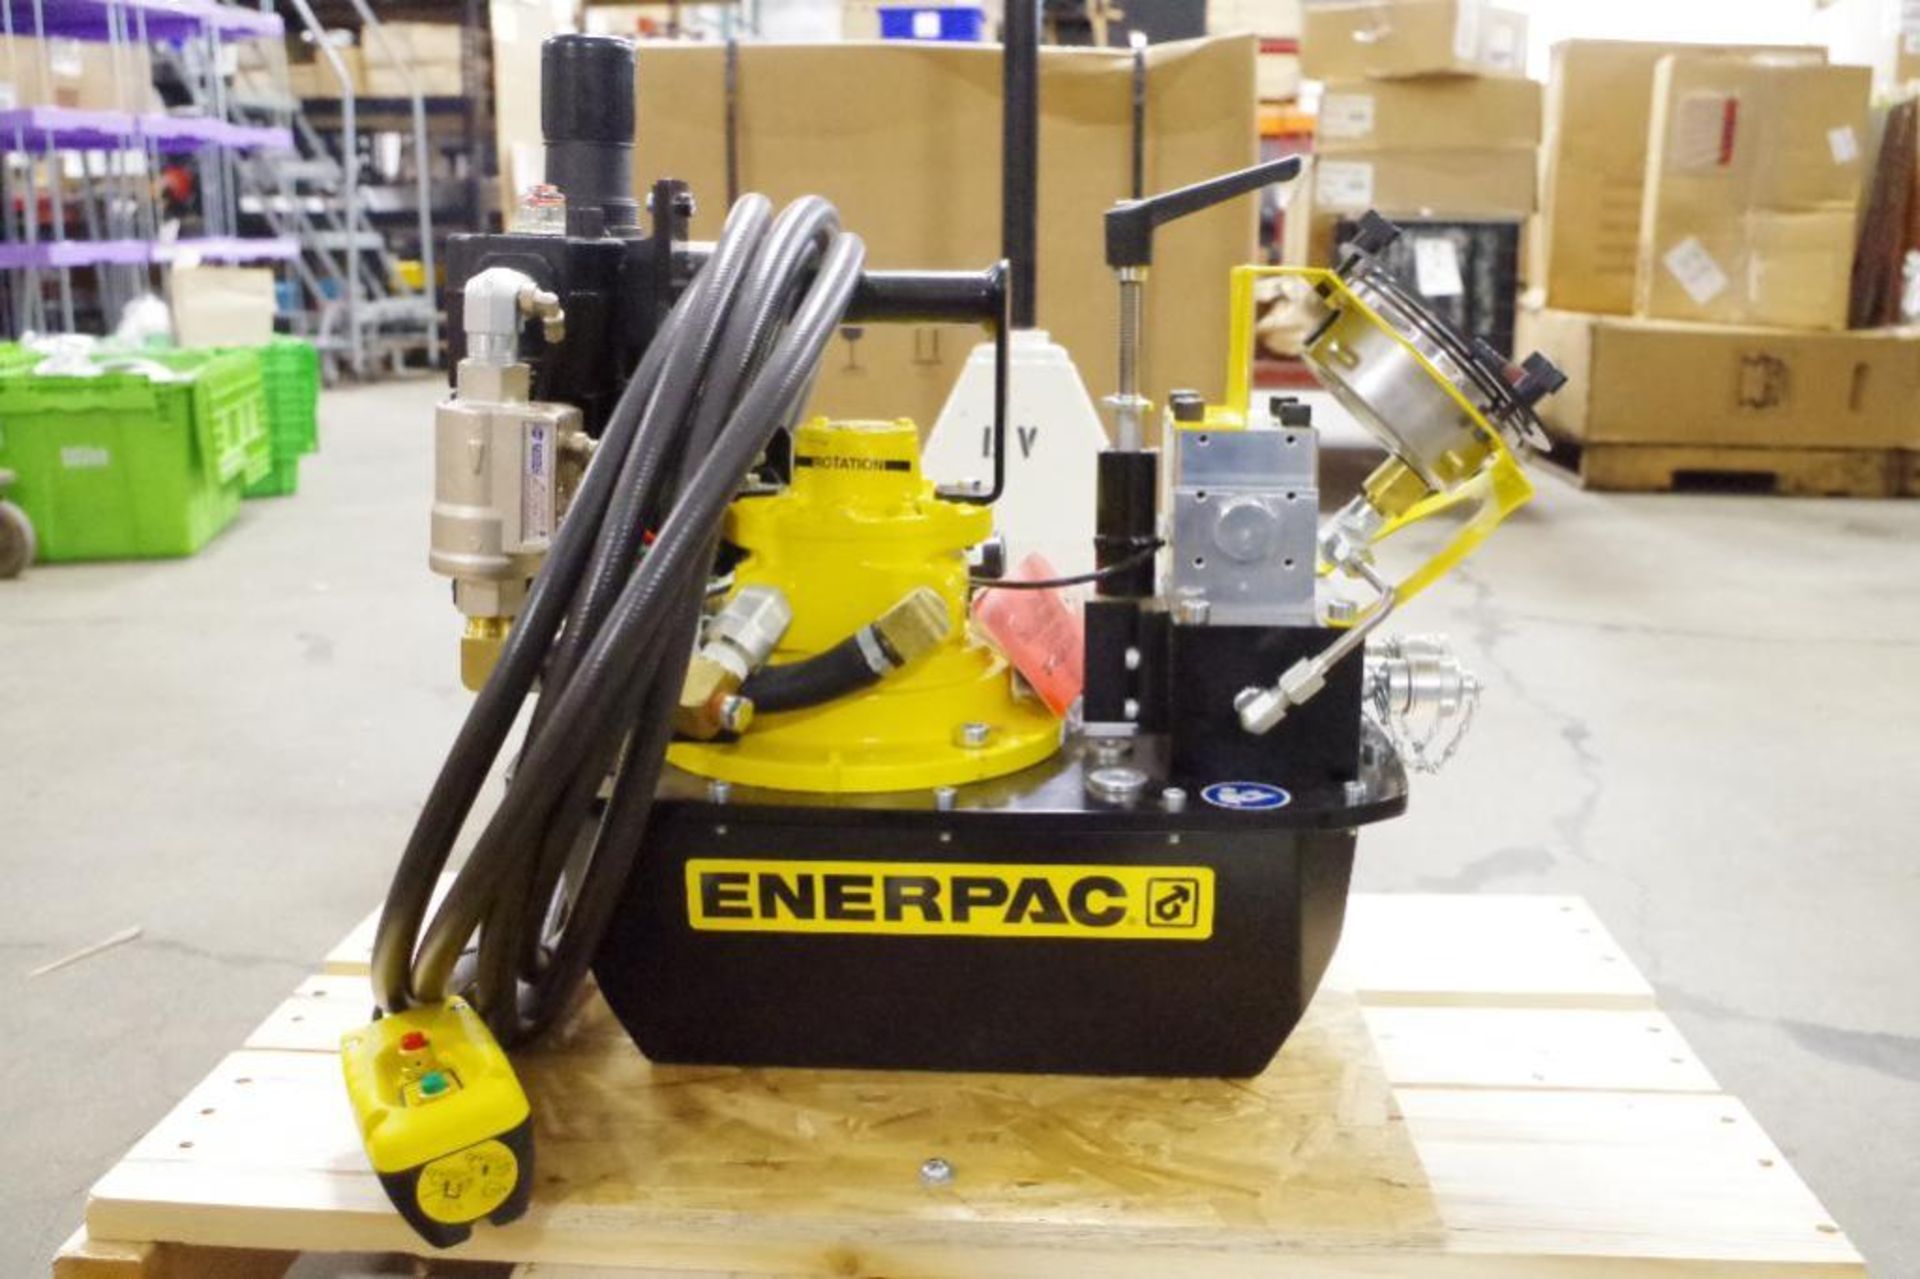 NEW ENERPAC Air Powered, Torque Wrench Hydraulic Pump, M/N ZA4204TX-Q, Made in USA - Image 3 of 7